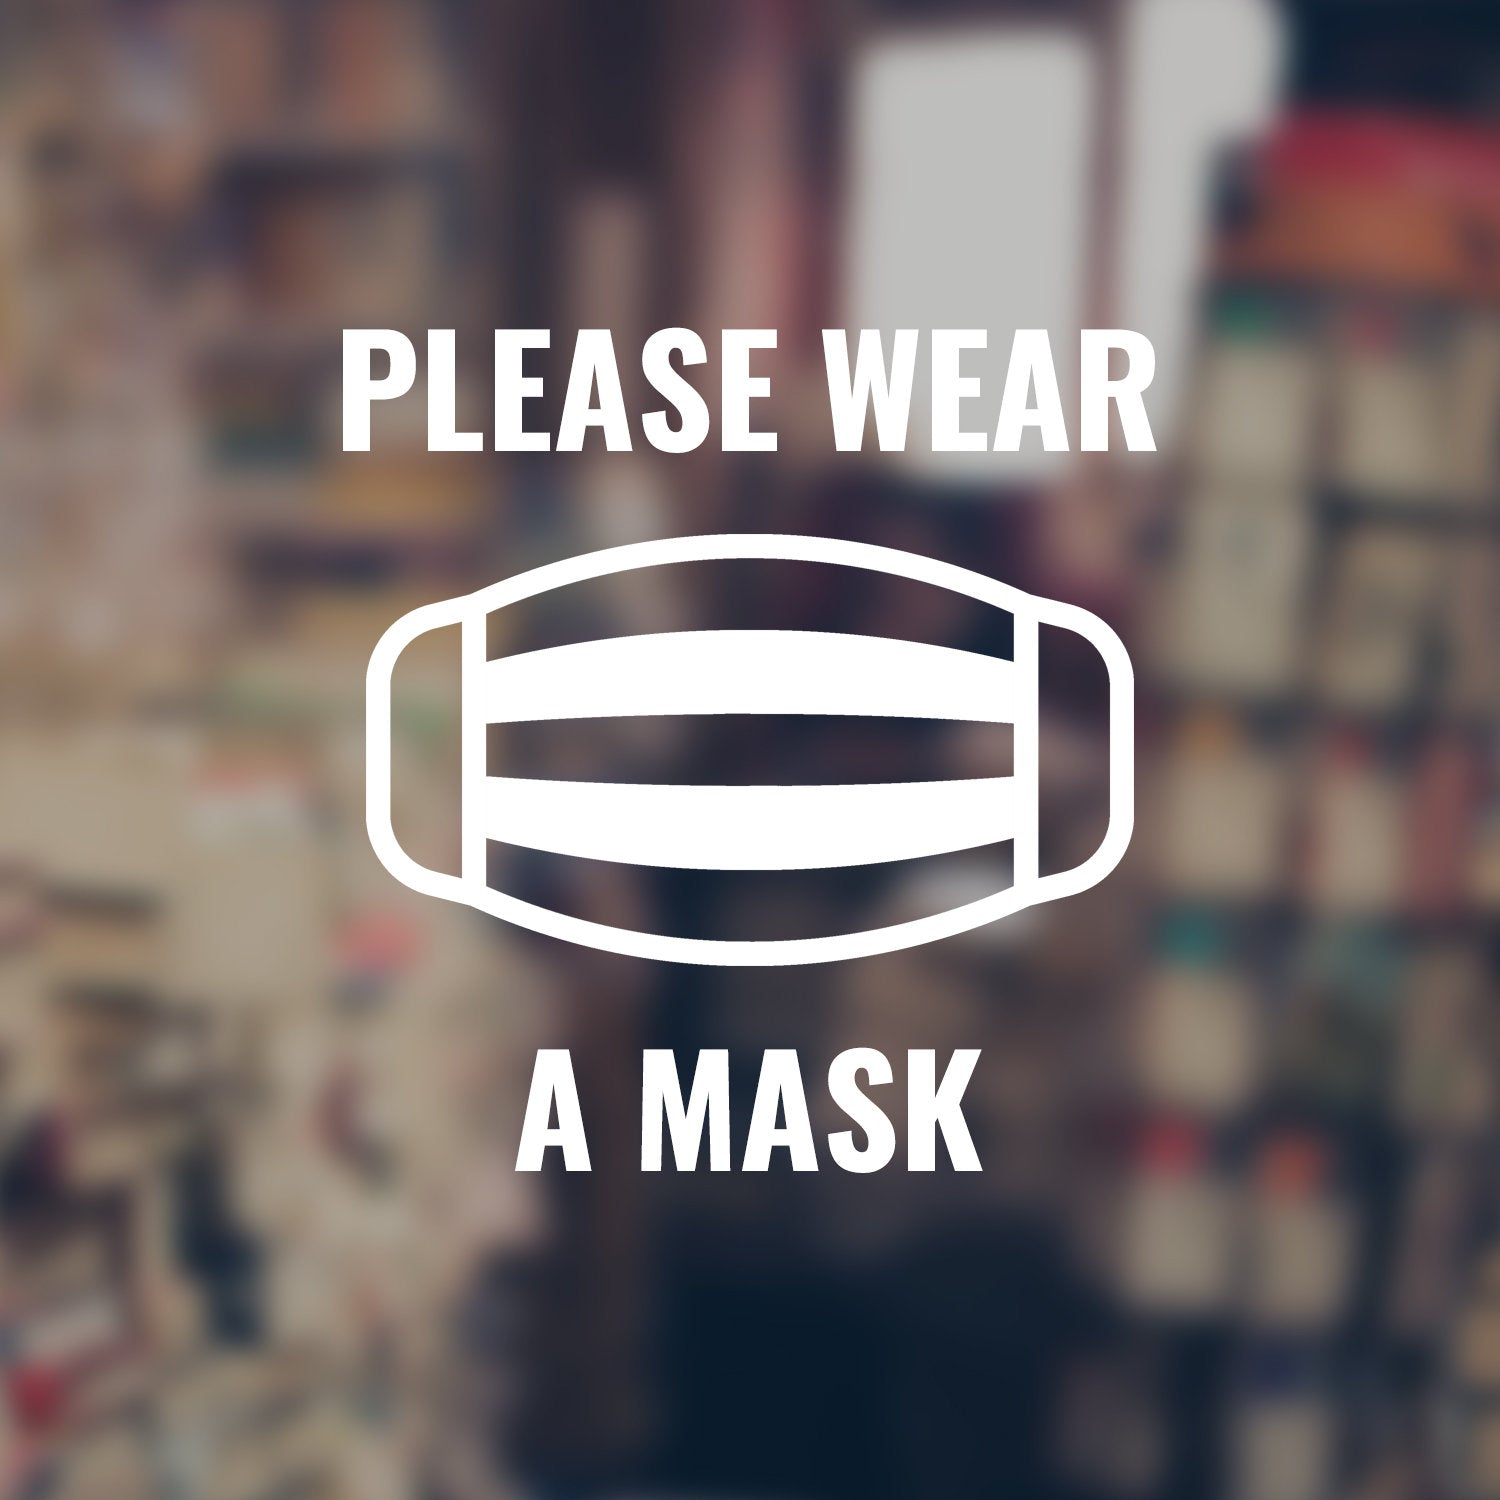 Please Wear a Mask - Face Mask Social Distancing Vinyl Decal for Windows, Doors, Walls of Small Businesses, Shops, Restaurants, and More!